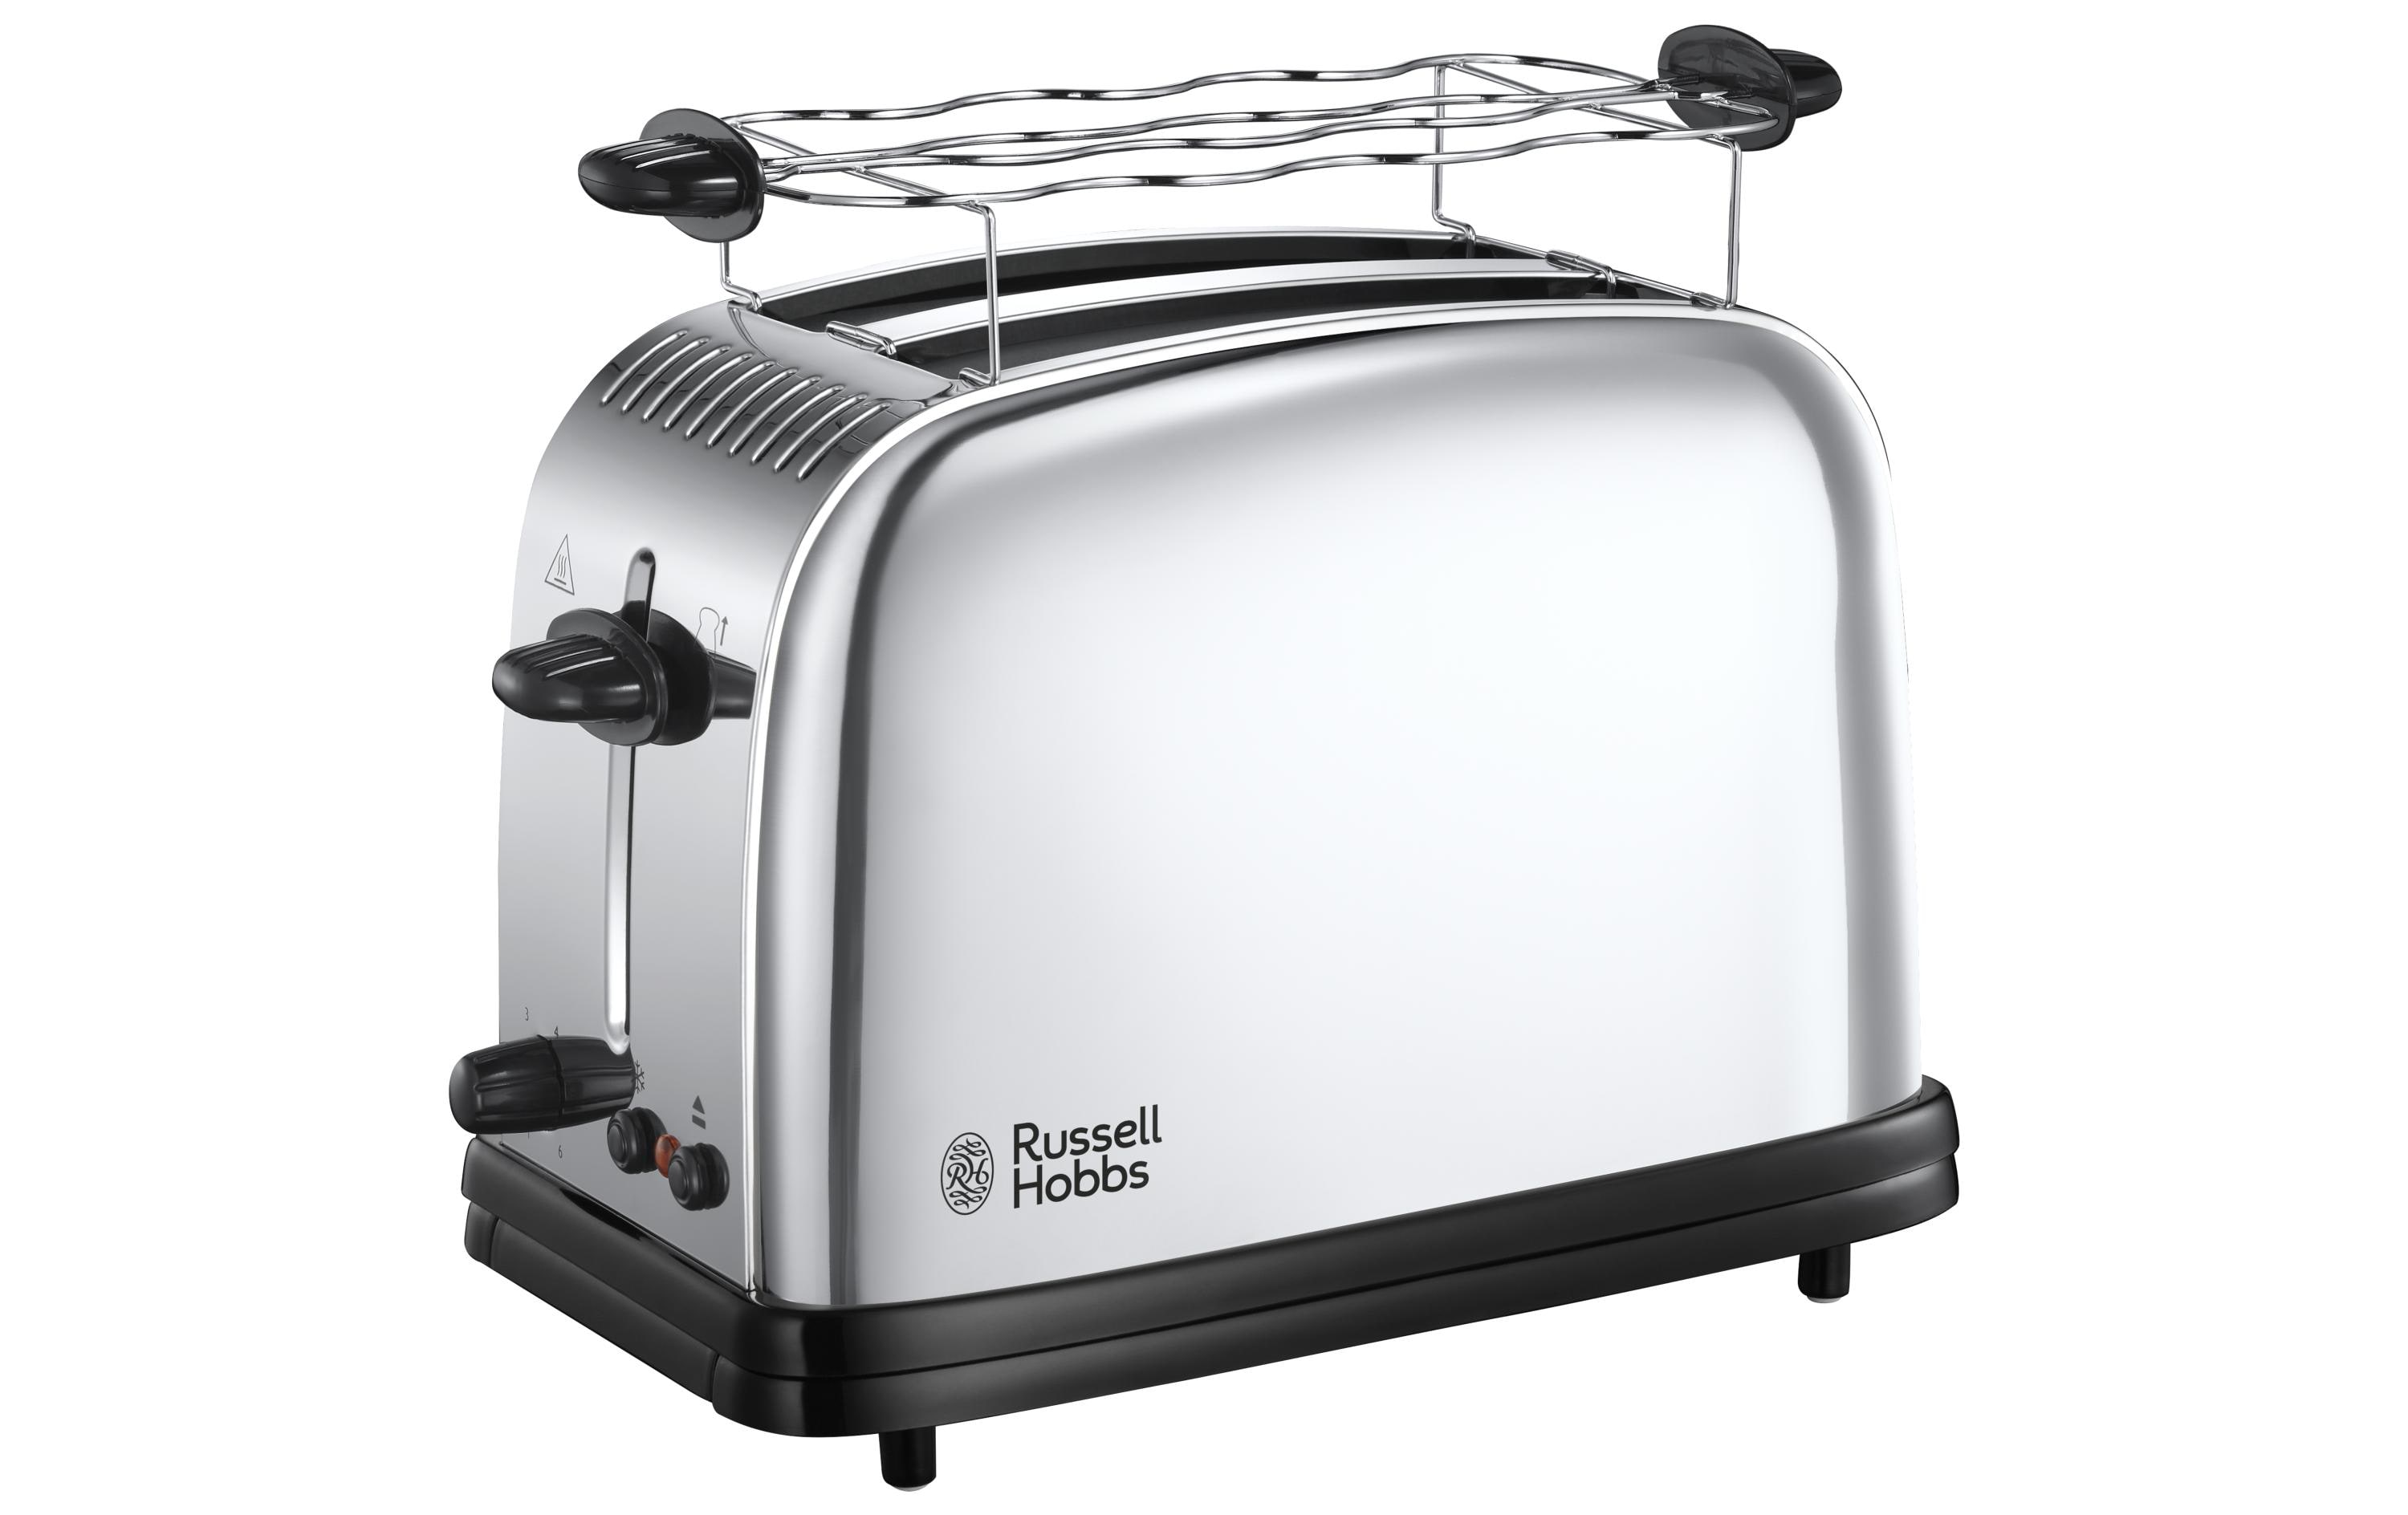 Russell Hobbs Toaster Victory 23310-56 Silber